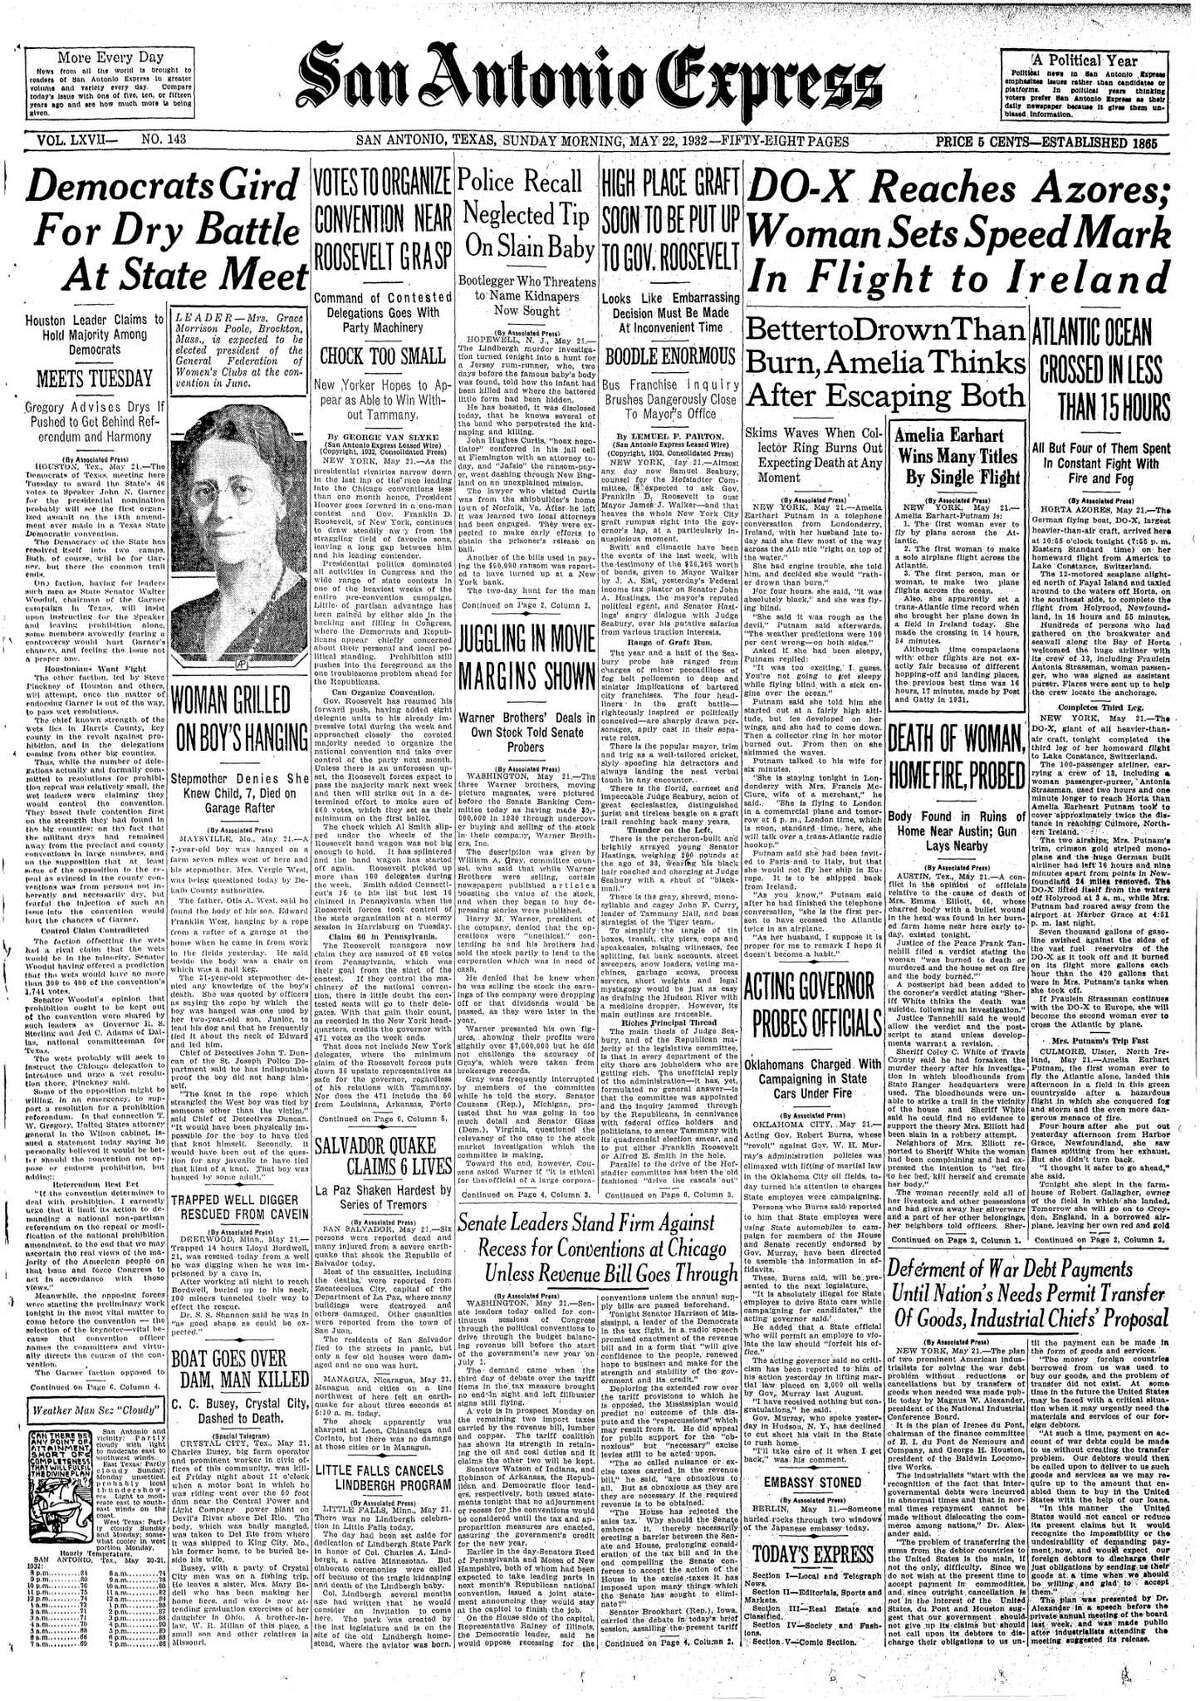 Front page May 22, 1932. Aviatrix Amelia Earhart becomes not only the first woman to fly across the Atlantic but does it solo as well. Newspaper accounts from the time referred to her as Amelia Earhart, or simply Amelia, in headlines, and by her married name, Putnam, on second reference, in text.